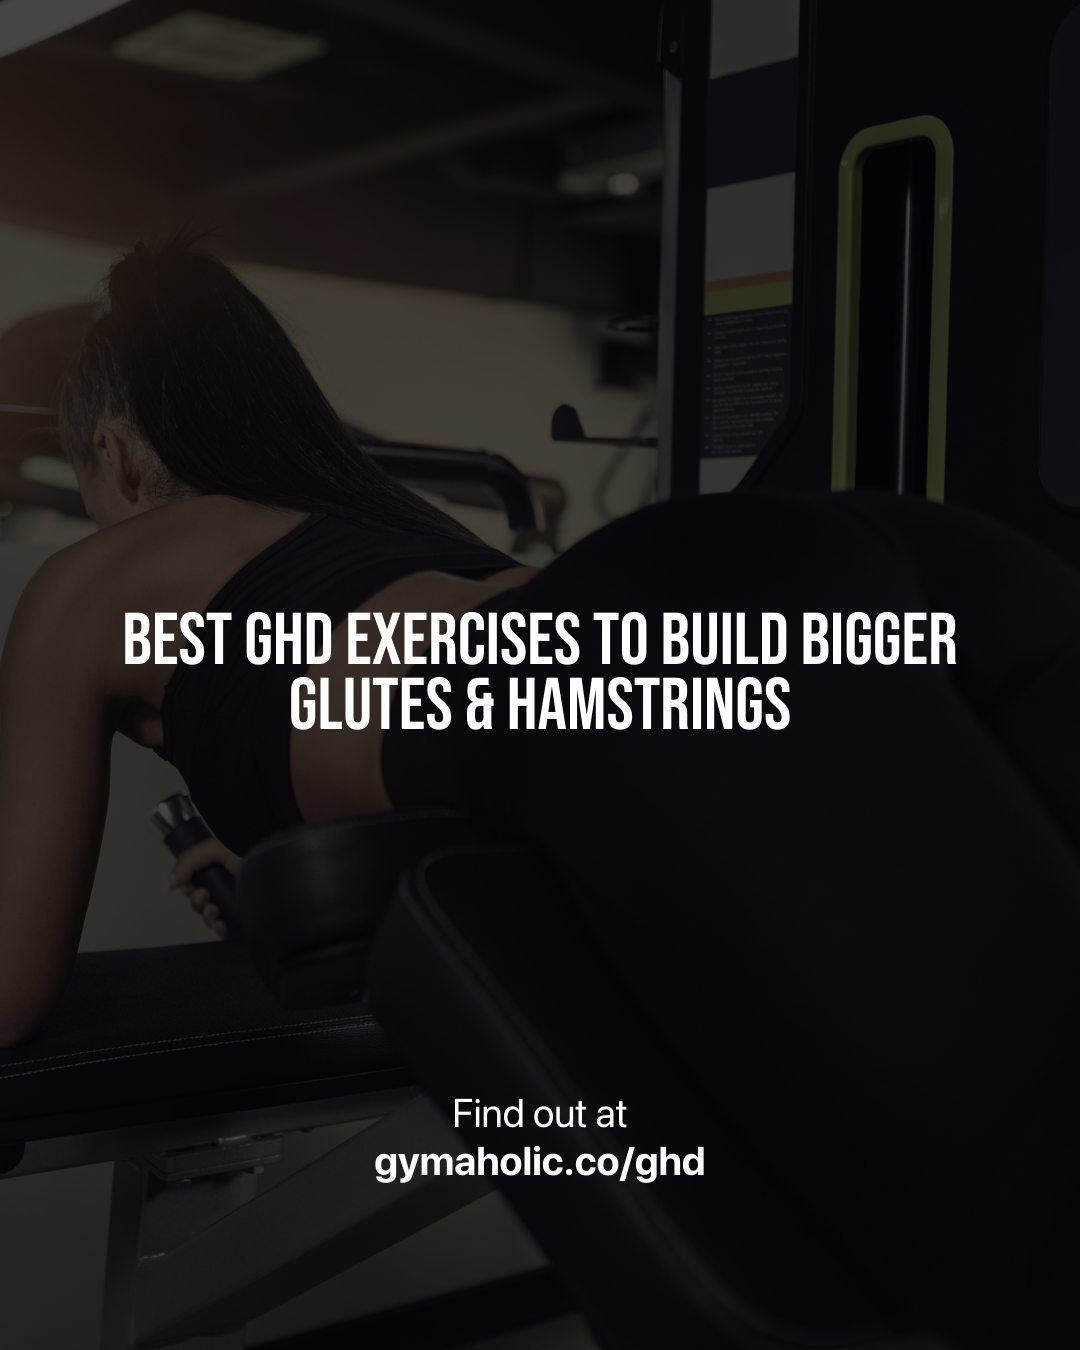 Best GHD Exercises To Build Bigger Glutes & Hamstrings